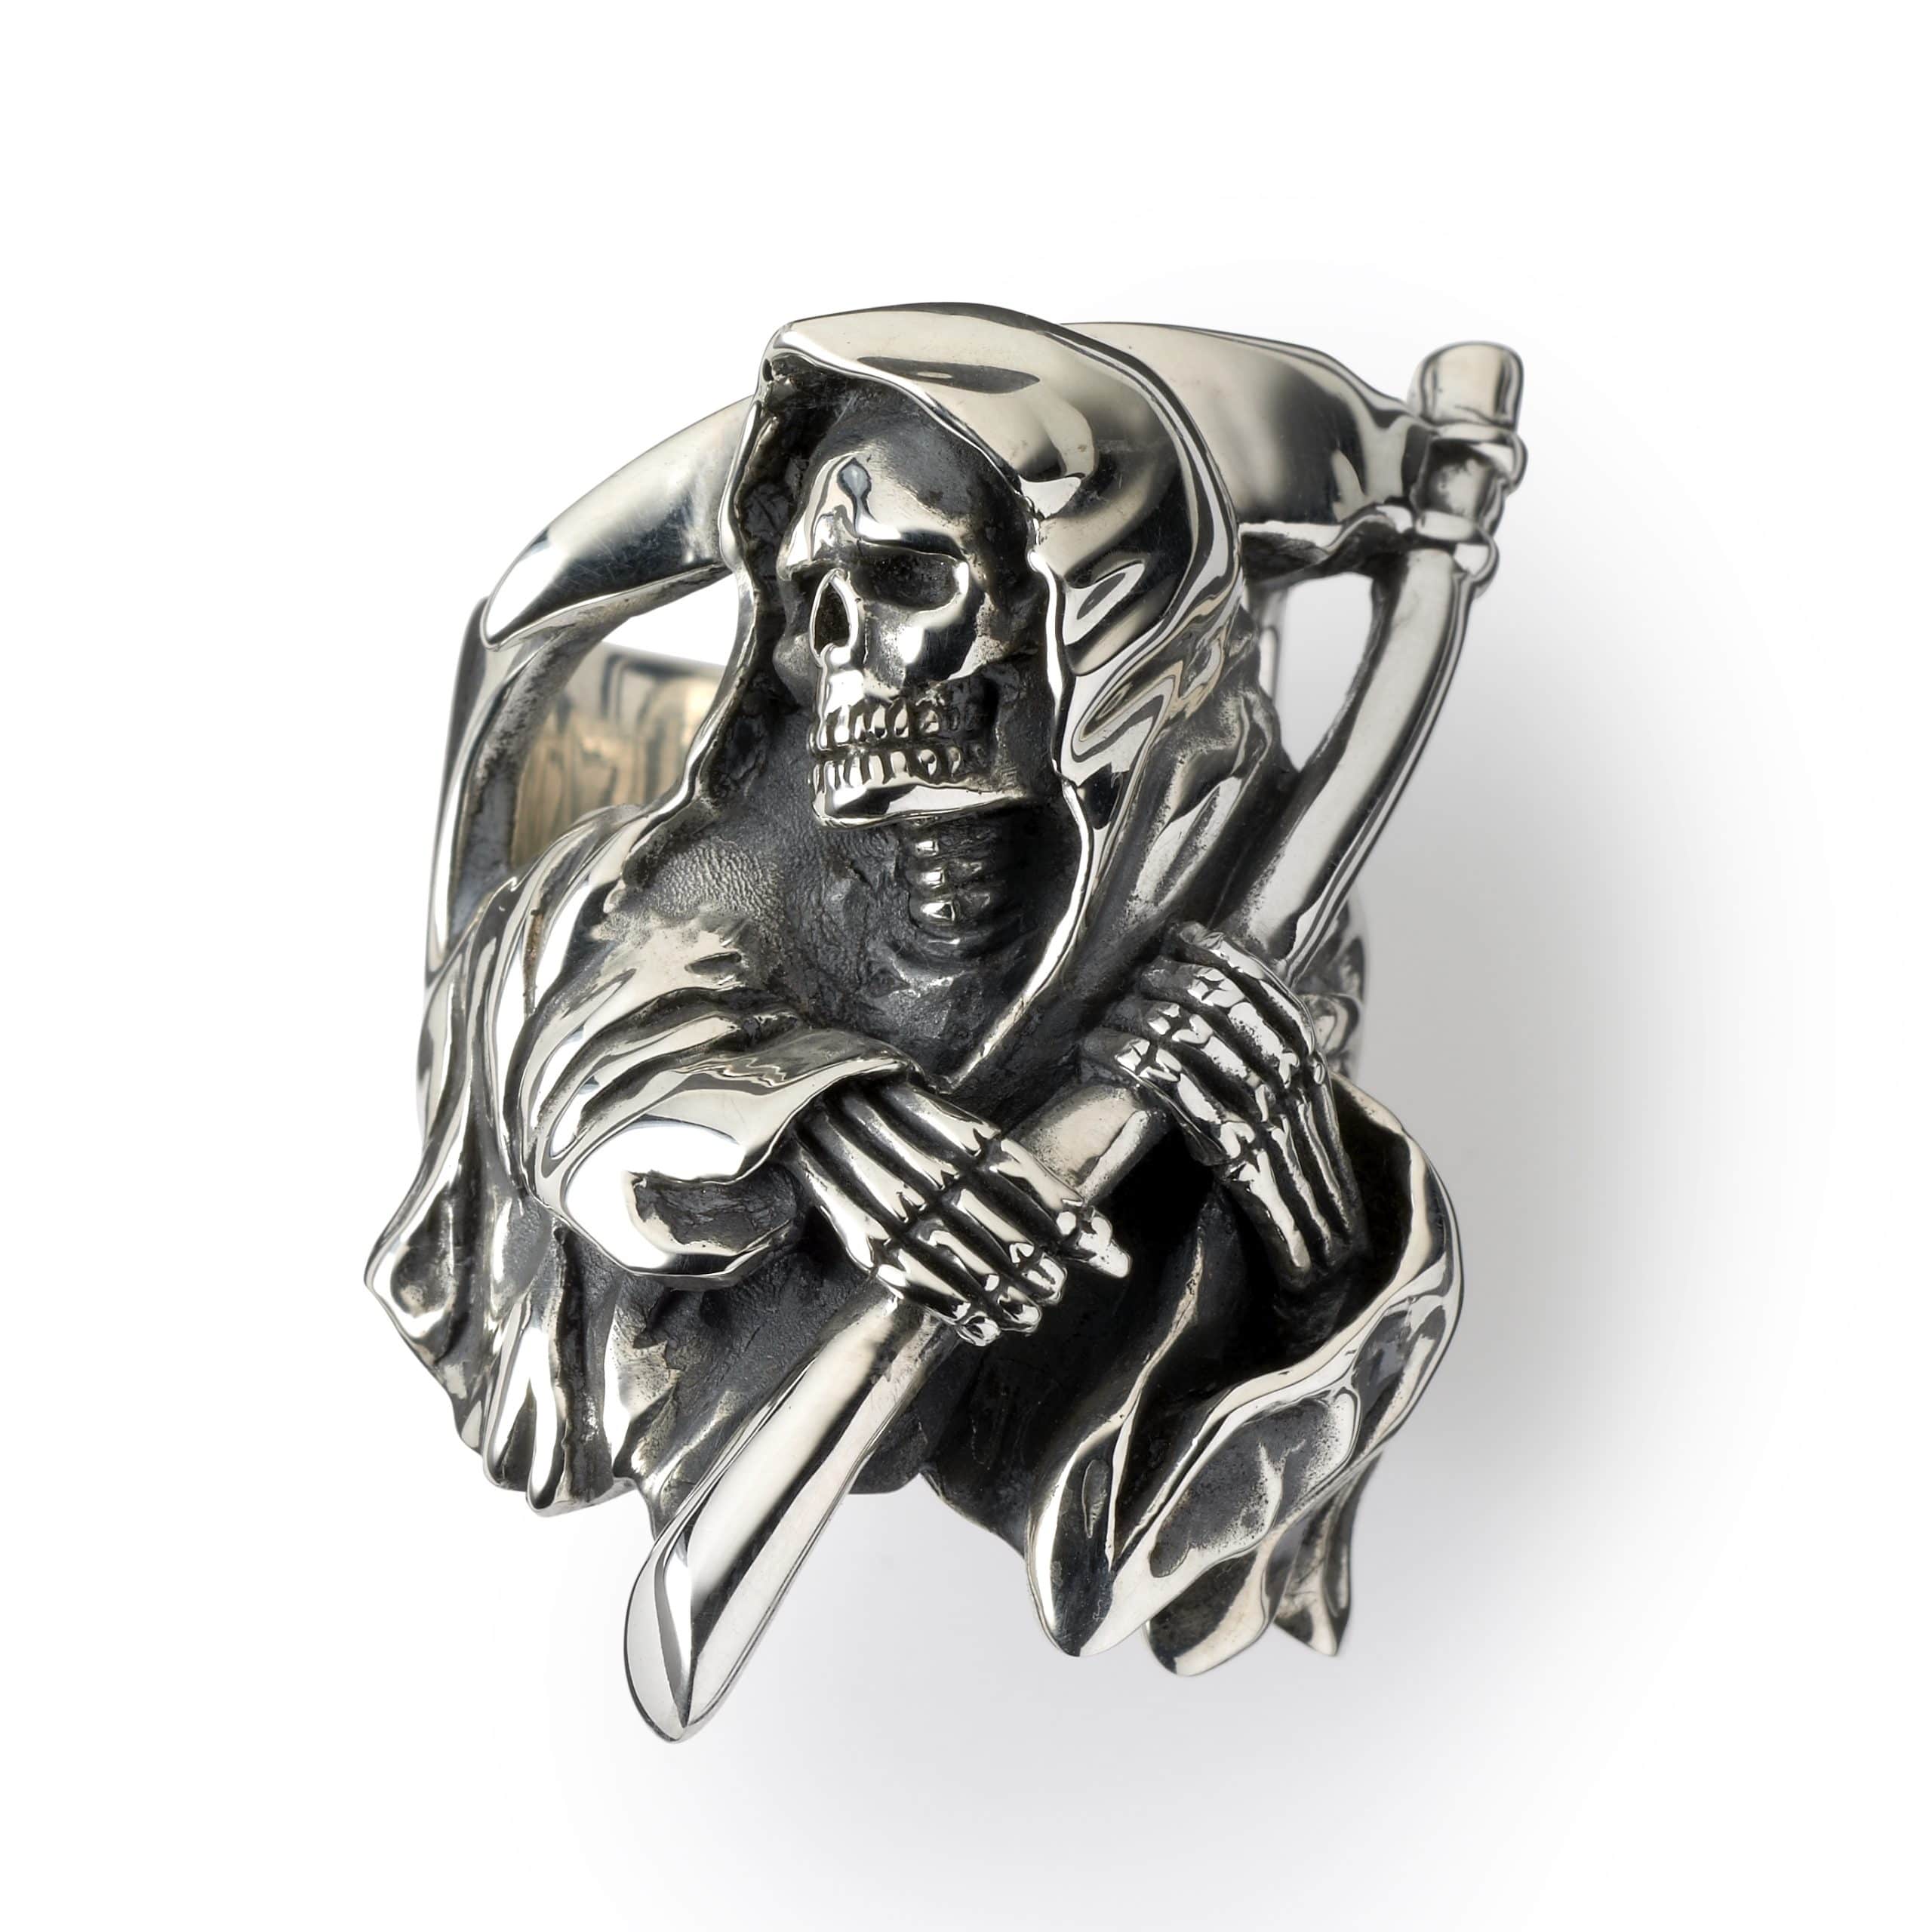 wes-lang-reaper-ring-front-scaled-1.jpg